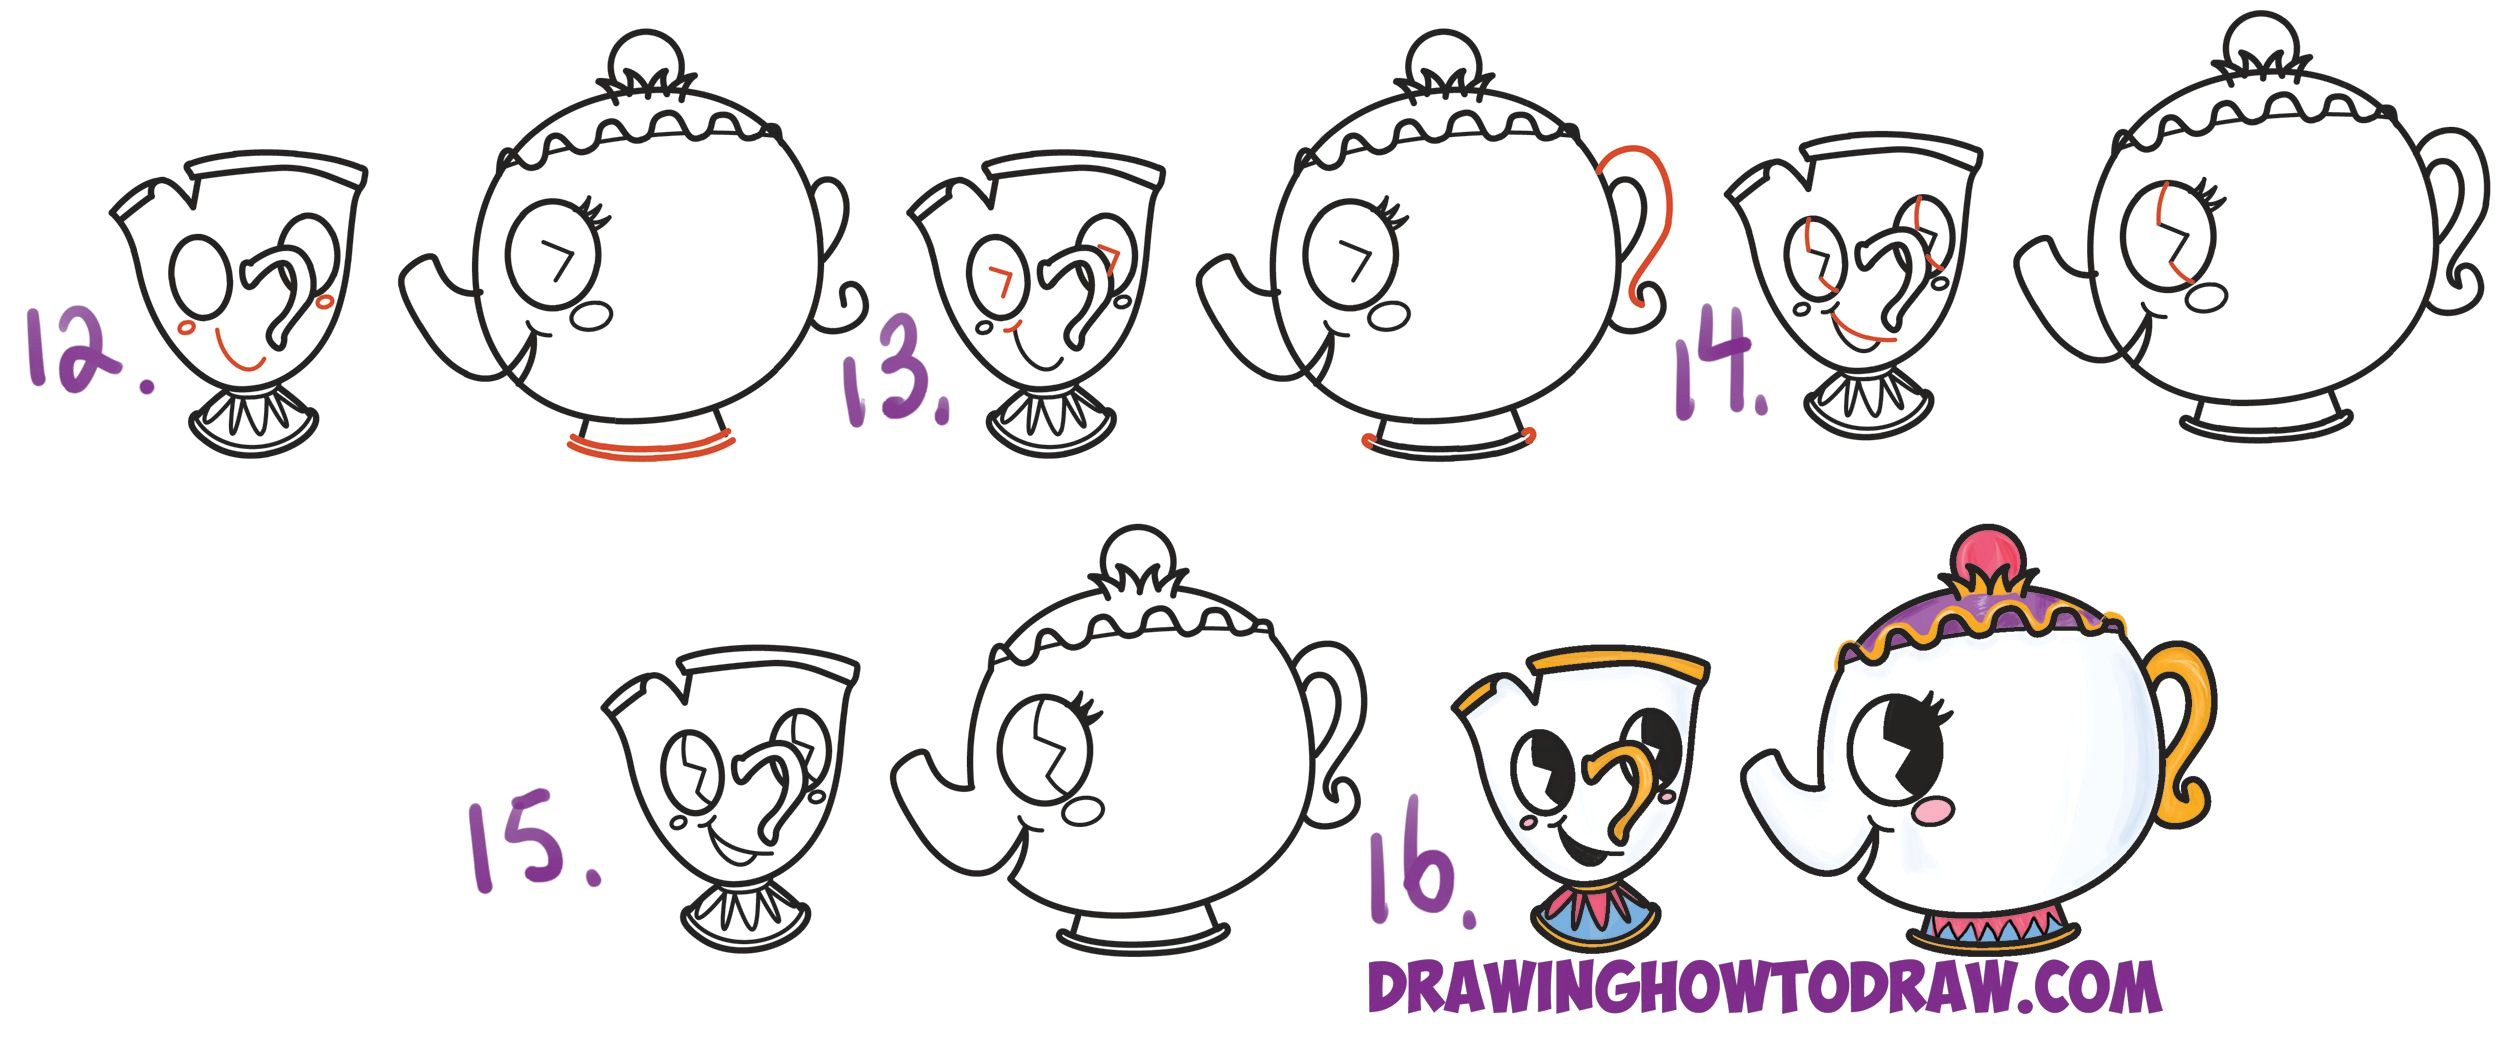 Drawing 7 Steps How to Draw Cute Kawaii Chibi Mrs Potts and Chip From Beauty and